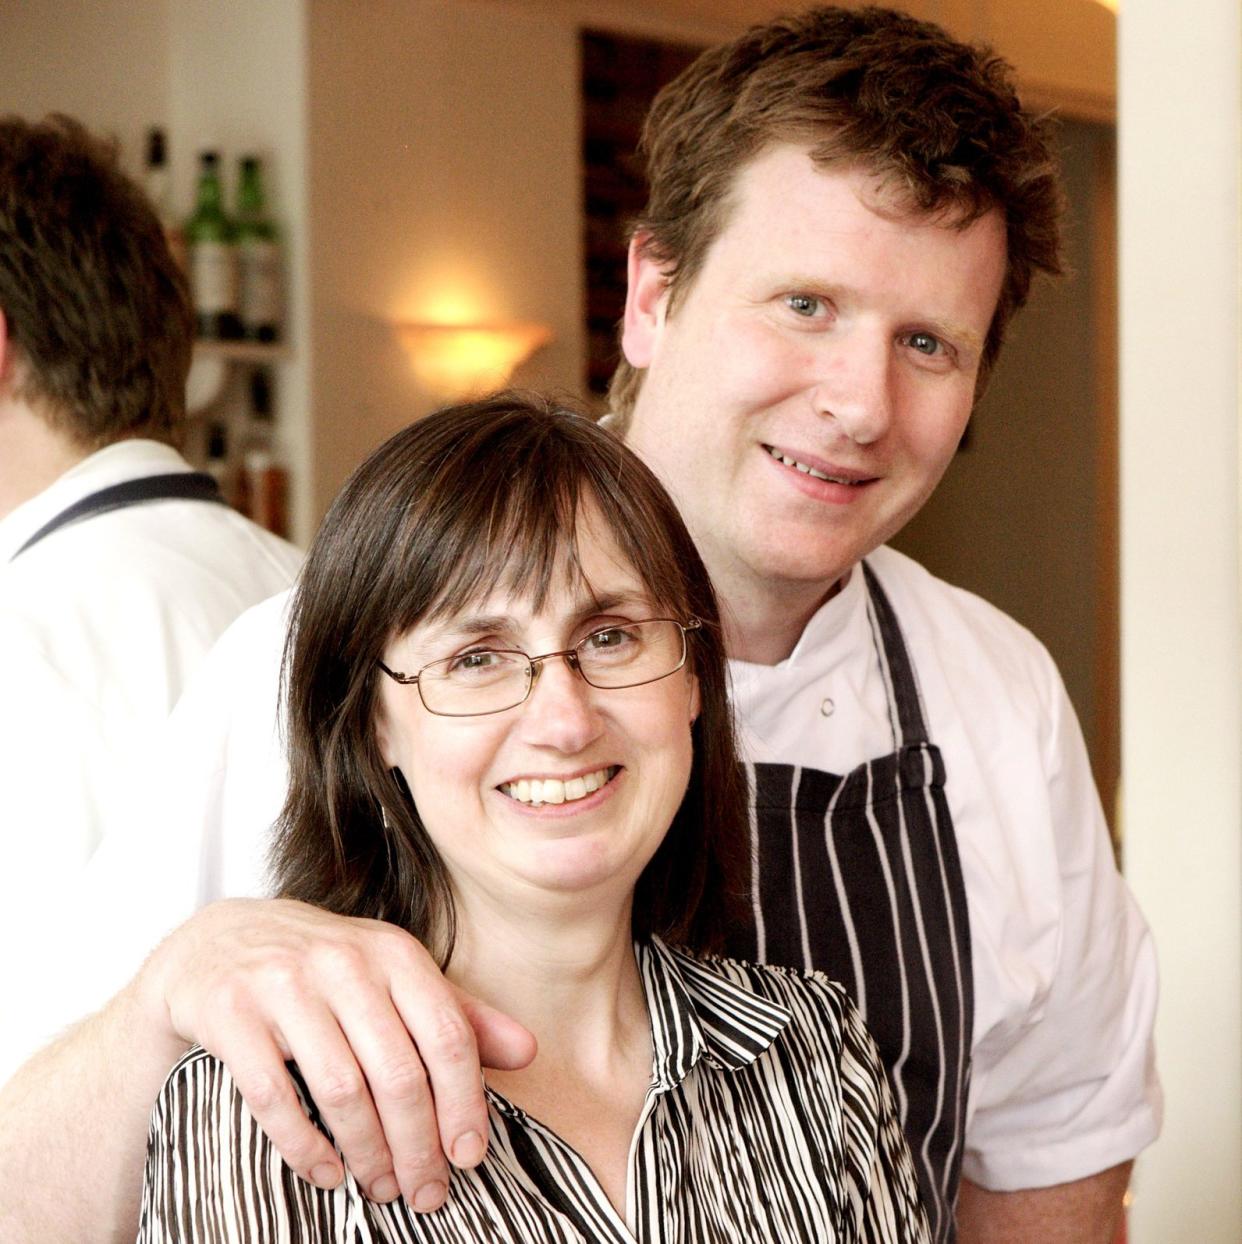 Lucy and Michael Hjort opened Melton's restaurant in York in 1990